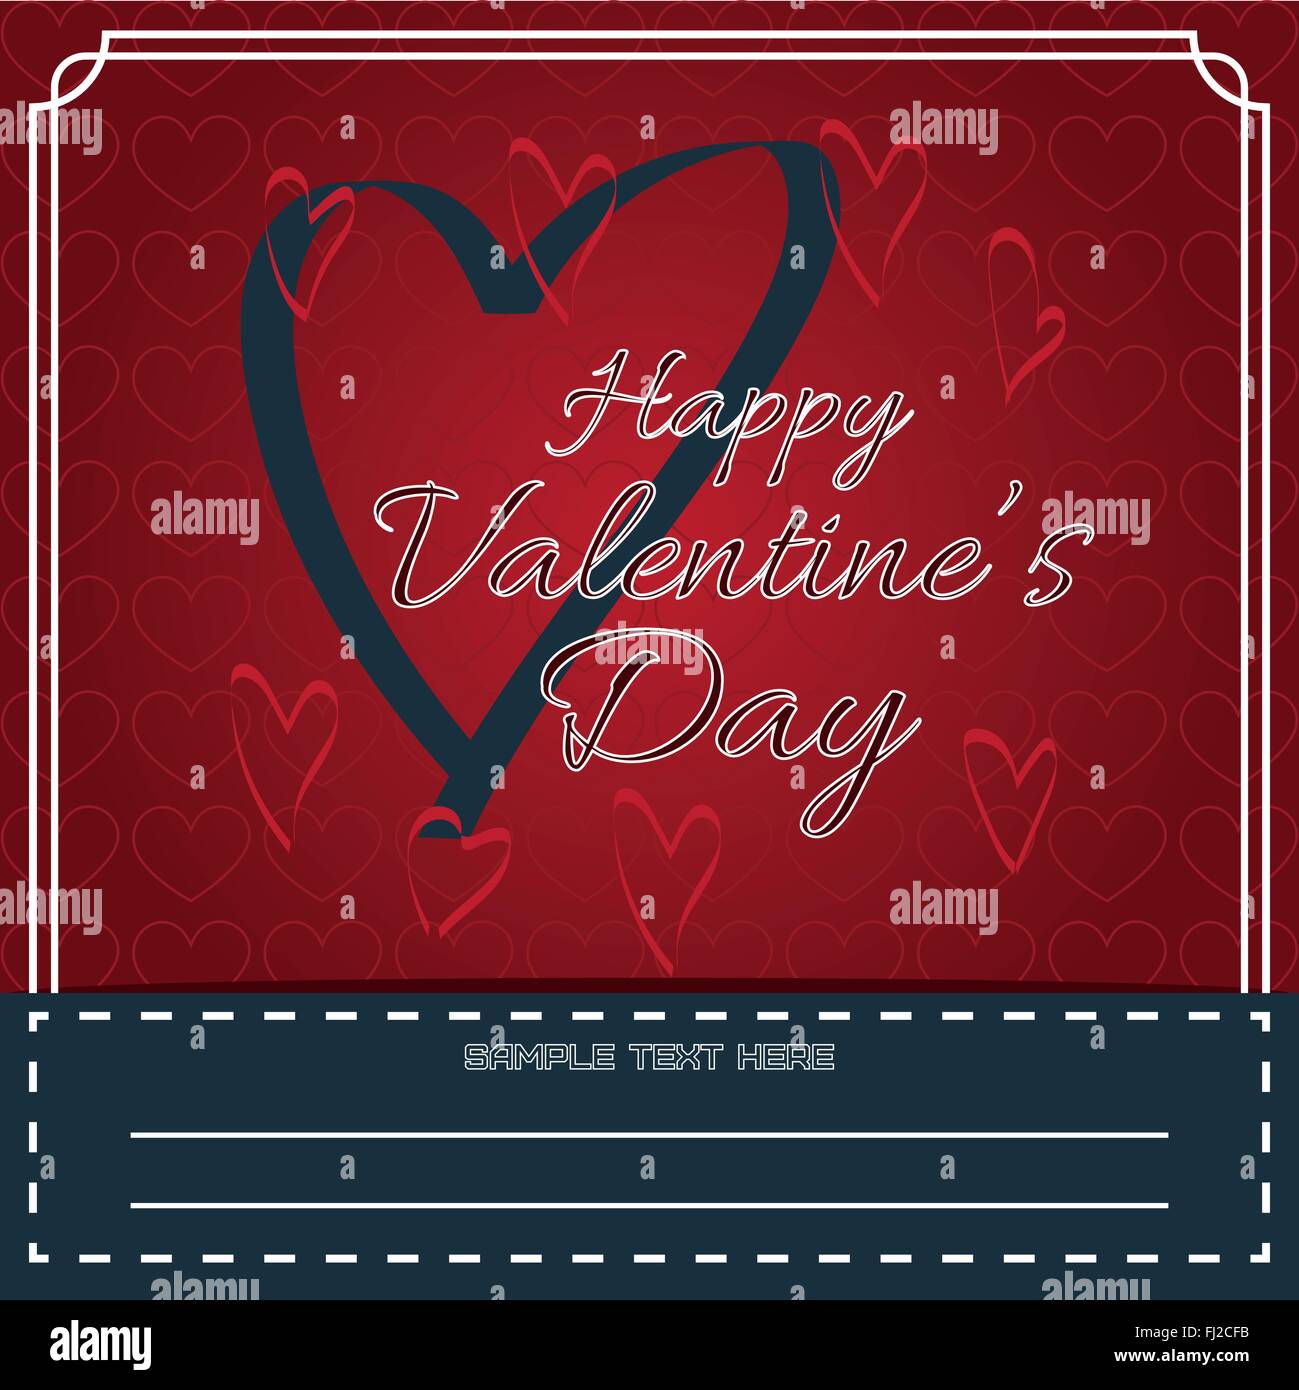 Valentine background - heart and stylish text Vector Image